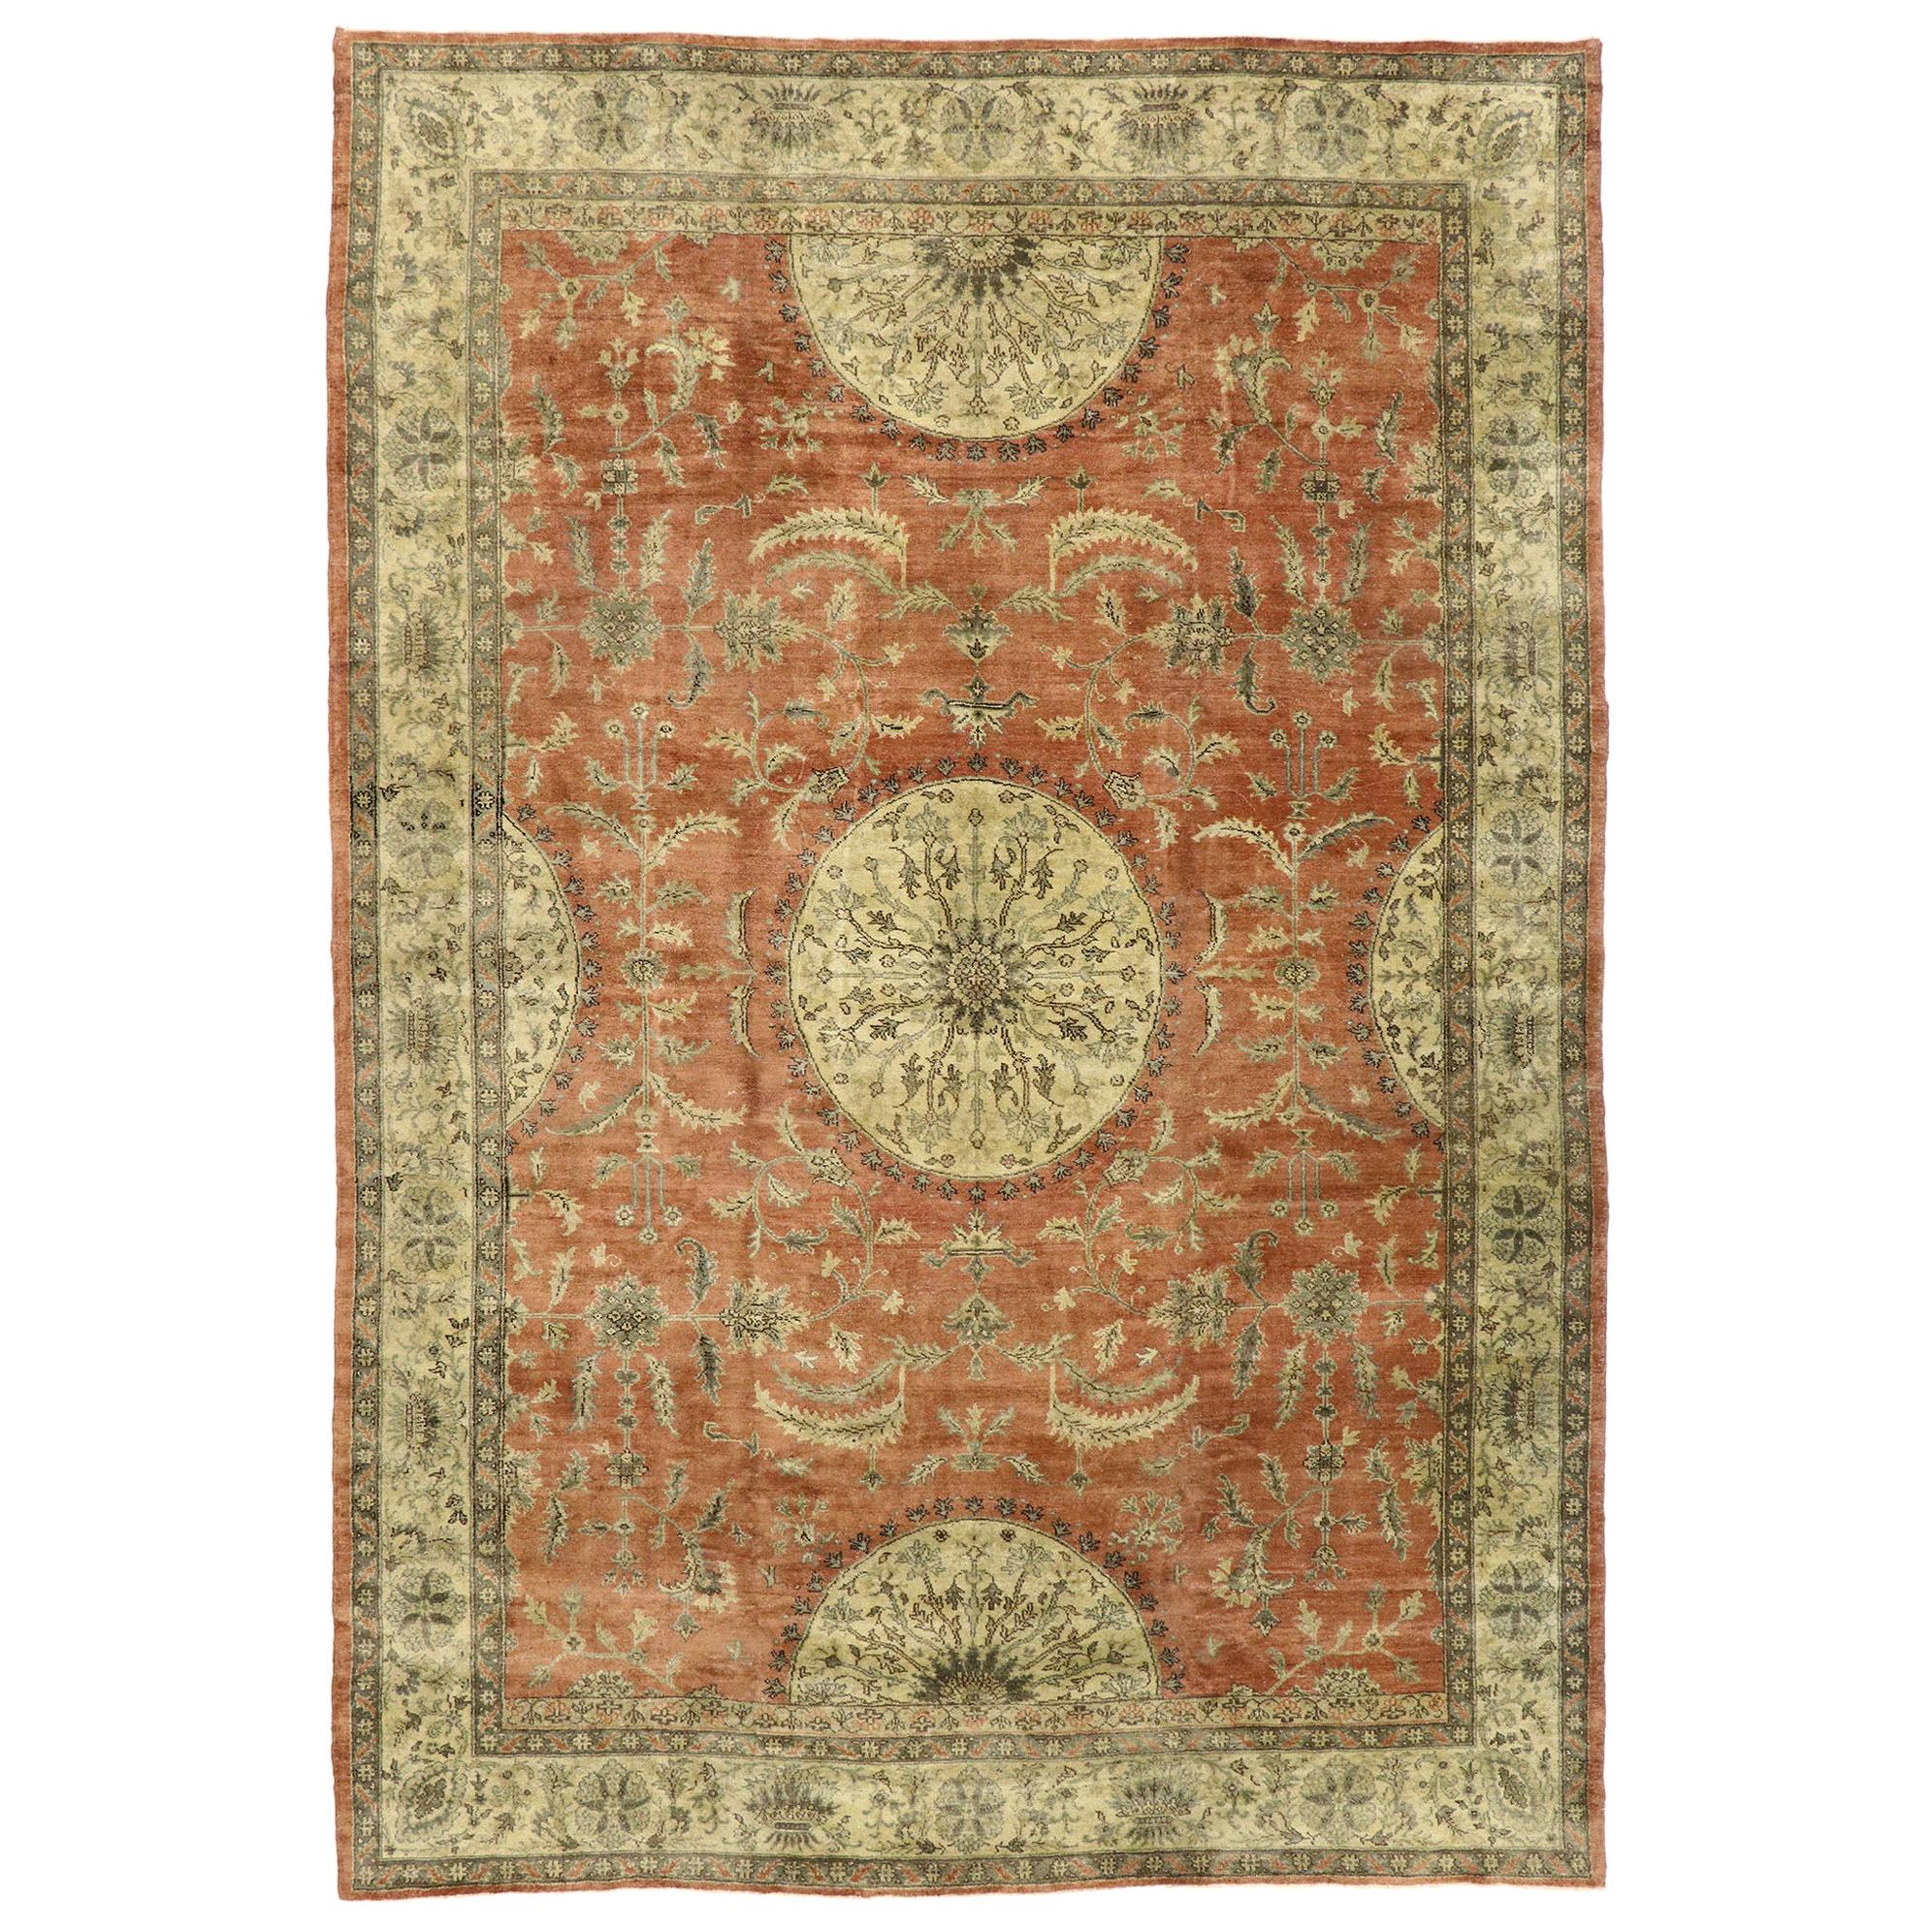 Distressed Vintage Turkish Oushak Rug with Rustic English Manor Style